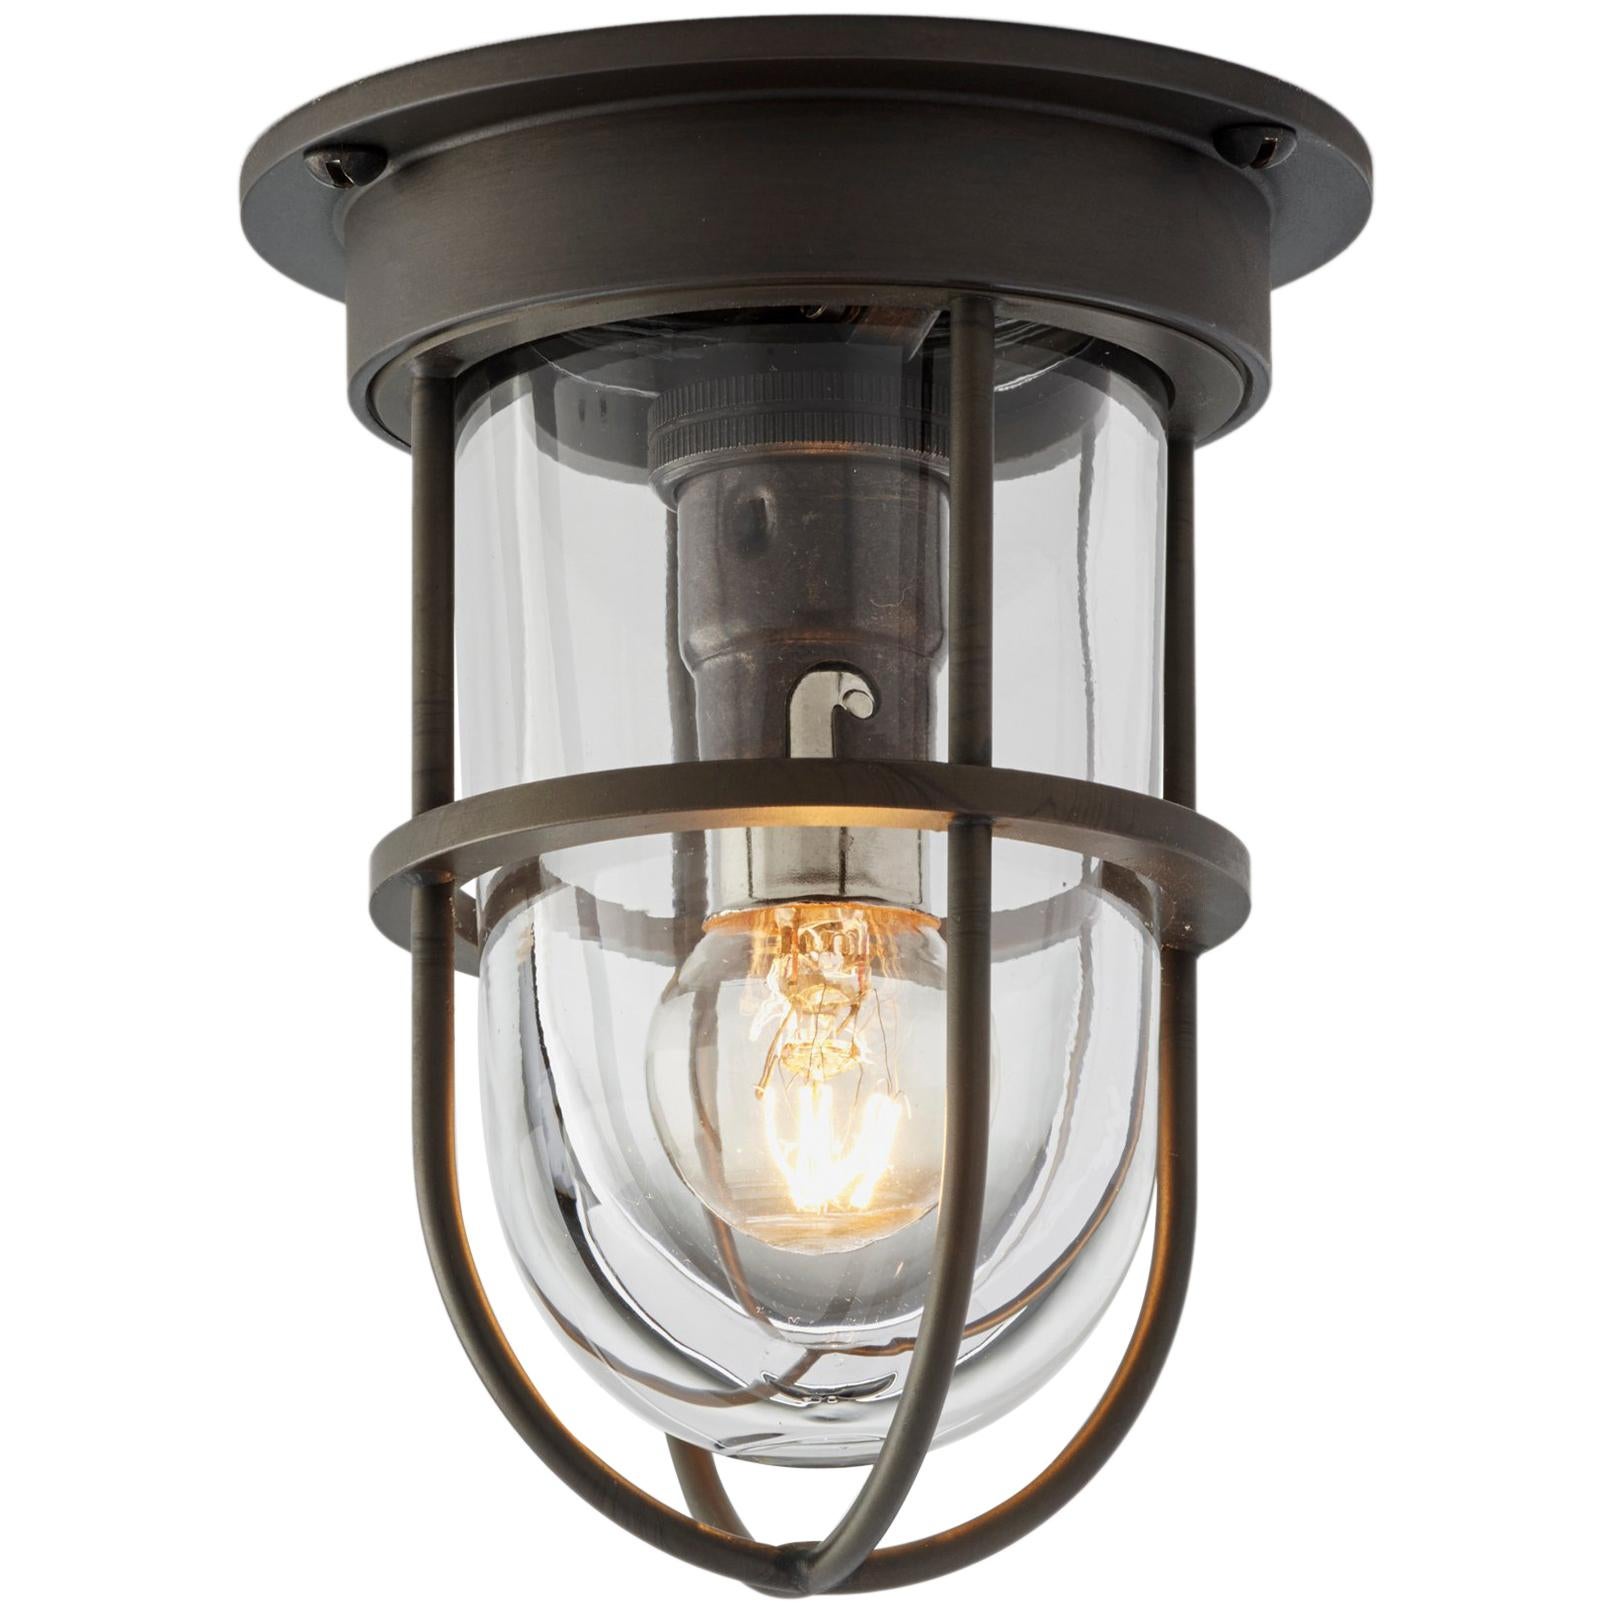 Tekna Bounty 12V Ceiling Light with Dark Bronze Finish and Clear Glass